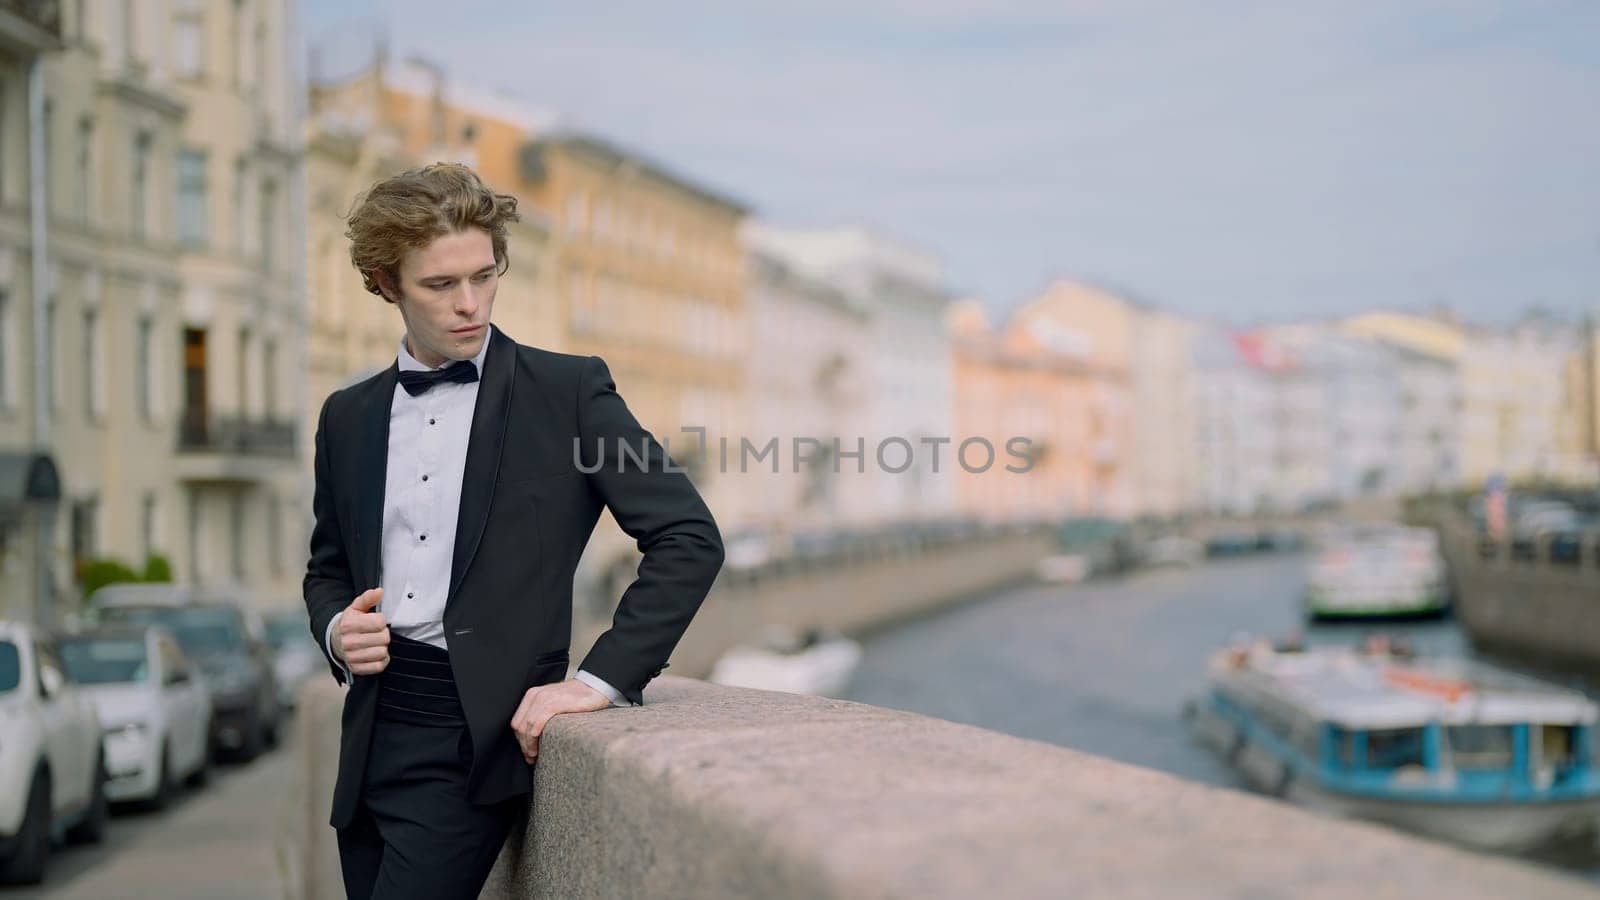 Models posing on the embankment . Action . A handsome, spectacular man in a suit with a bow tie and long hair standing with a young bride and posing for the camera. High quality 4k footage